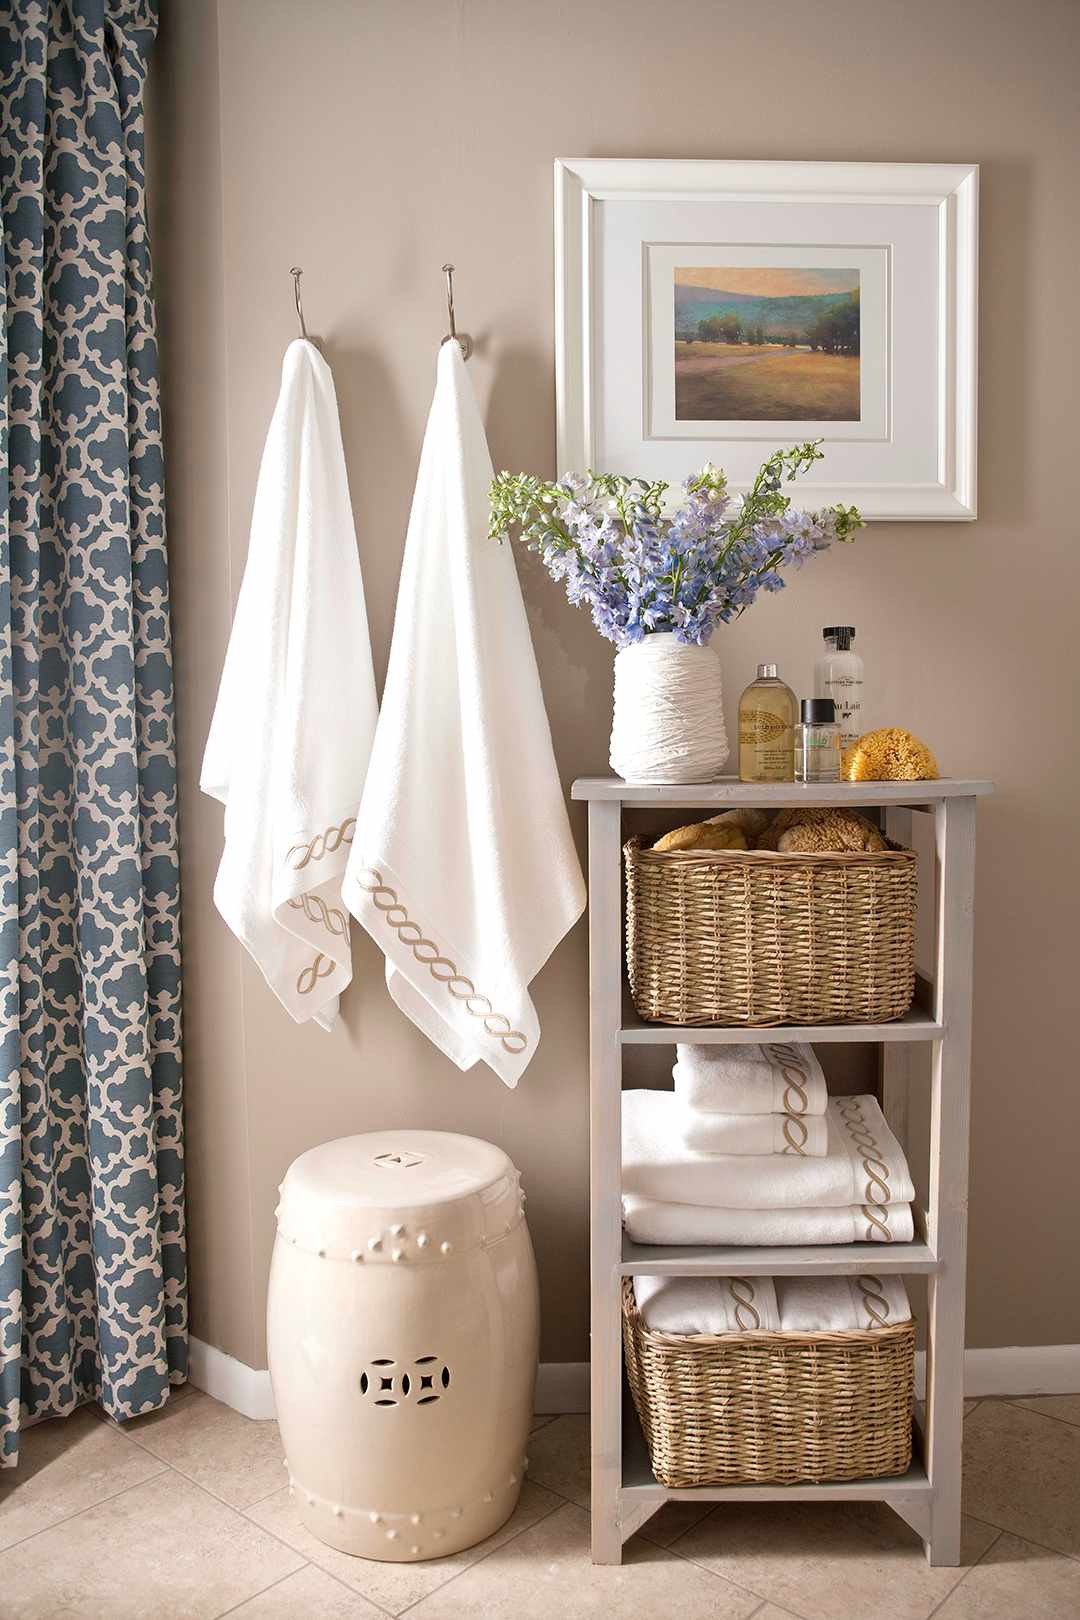 Small Bathroom Paint Colors Ideas / The 7 Best Small Bathroom Paint Colors : With the right paint colors, you can transform your small, dark bathroom into a cheery work of art.